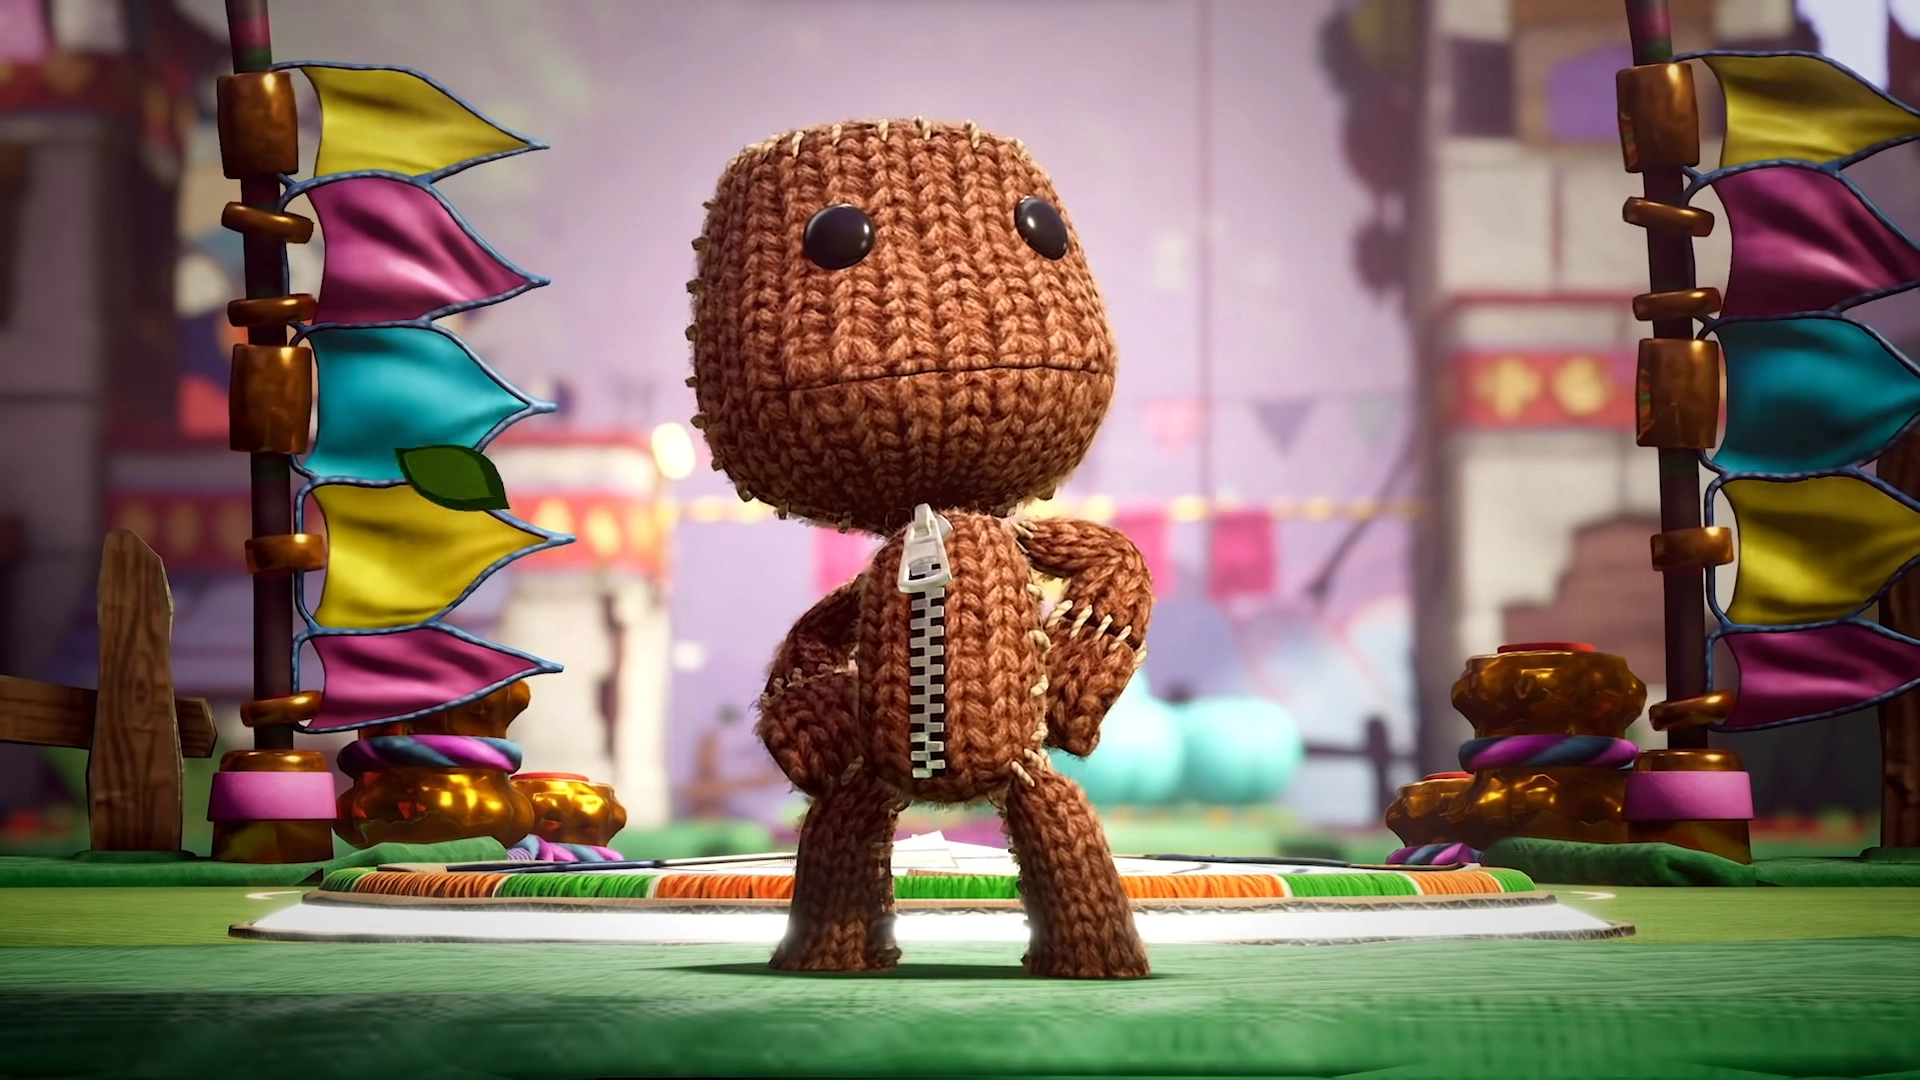 Rumor: Details about the PC versions of Sackboy: A Big Adventure and Returnal, including screenshots